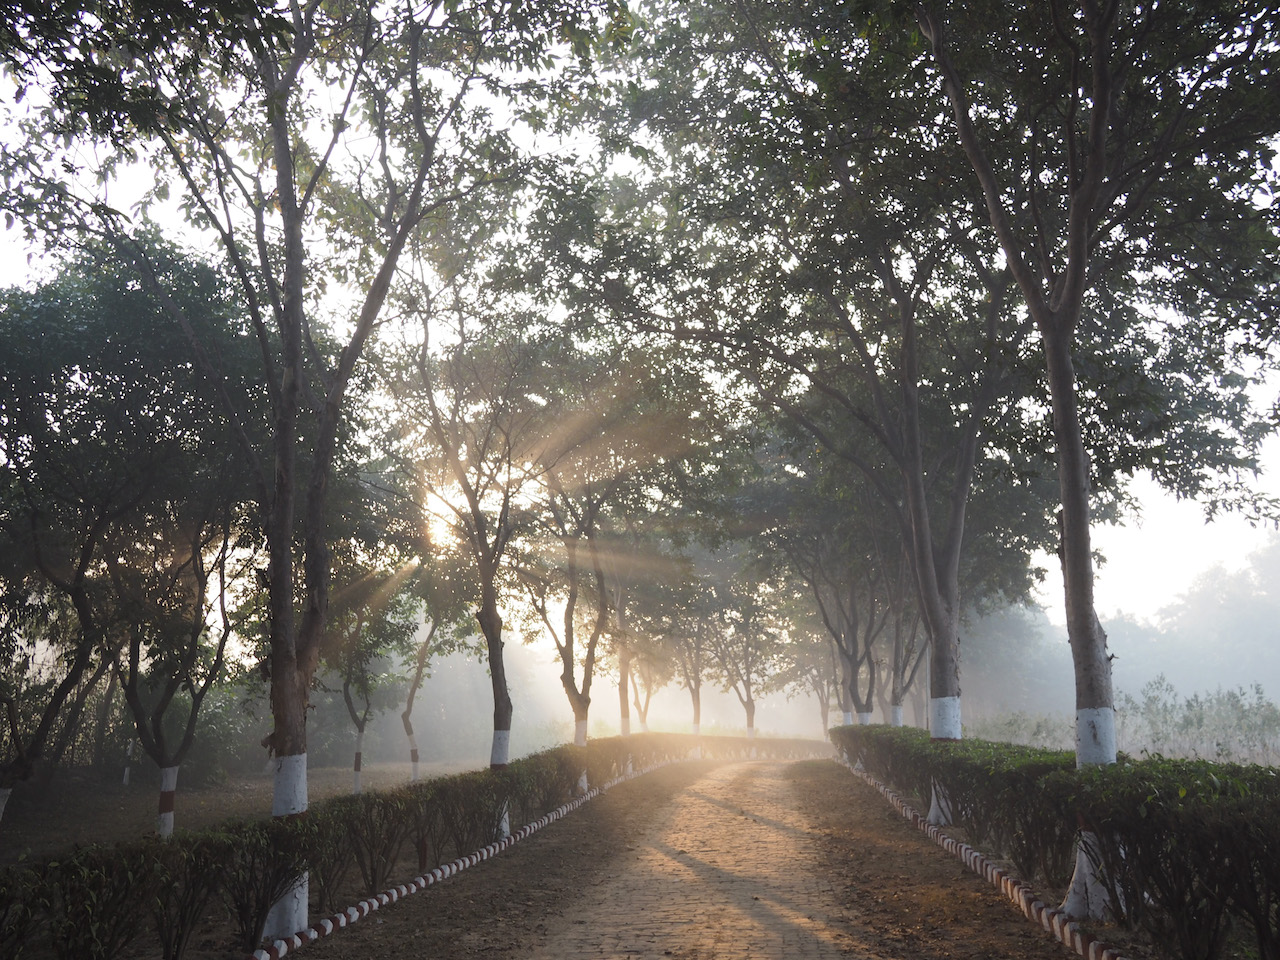 Campus Walkway on a Foggy Morning - Himalayan Institute